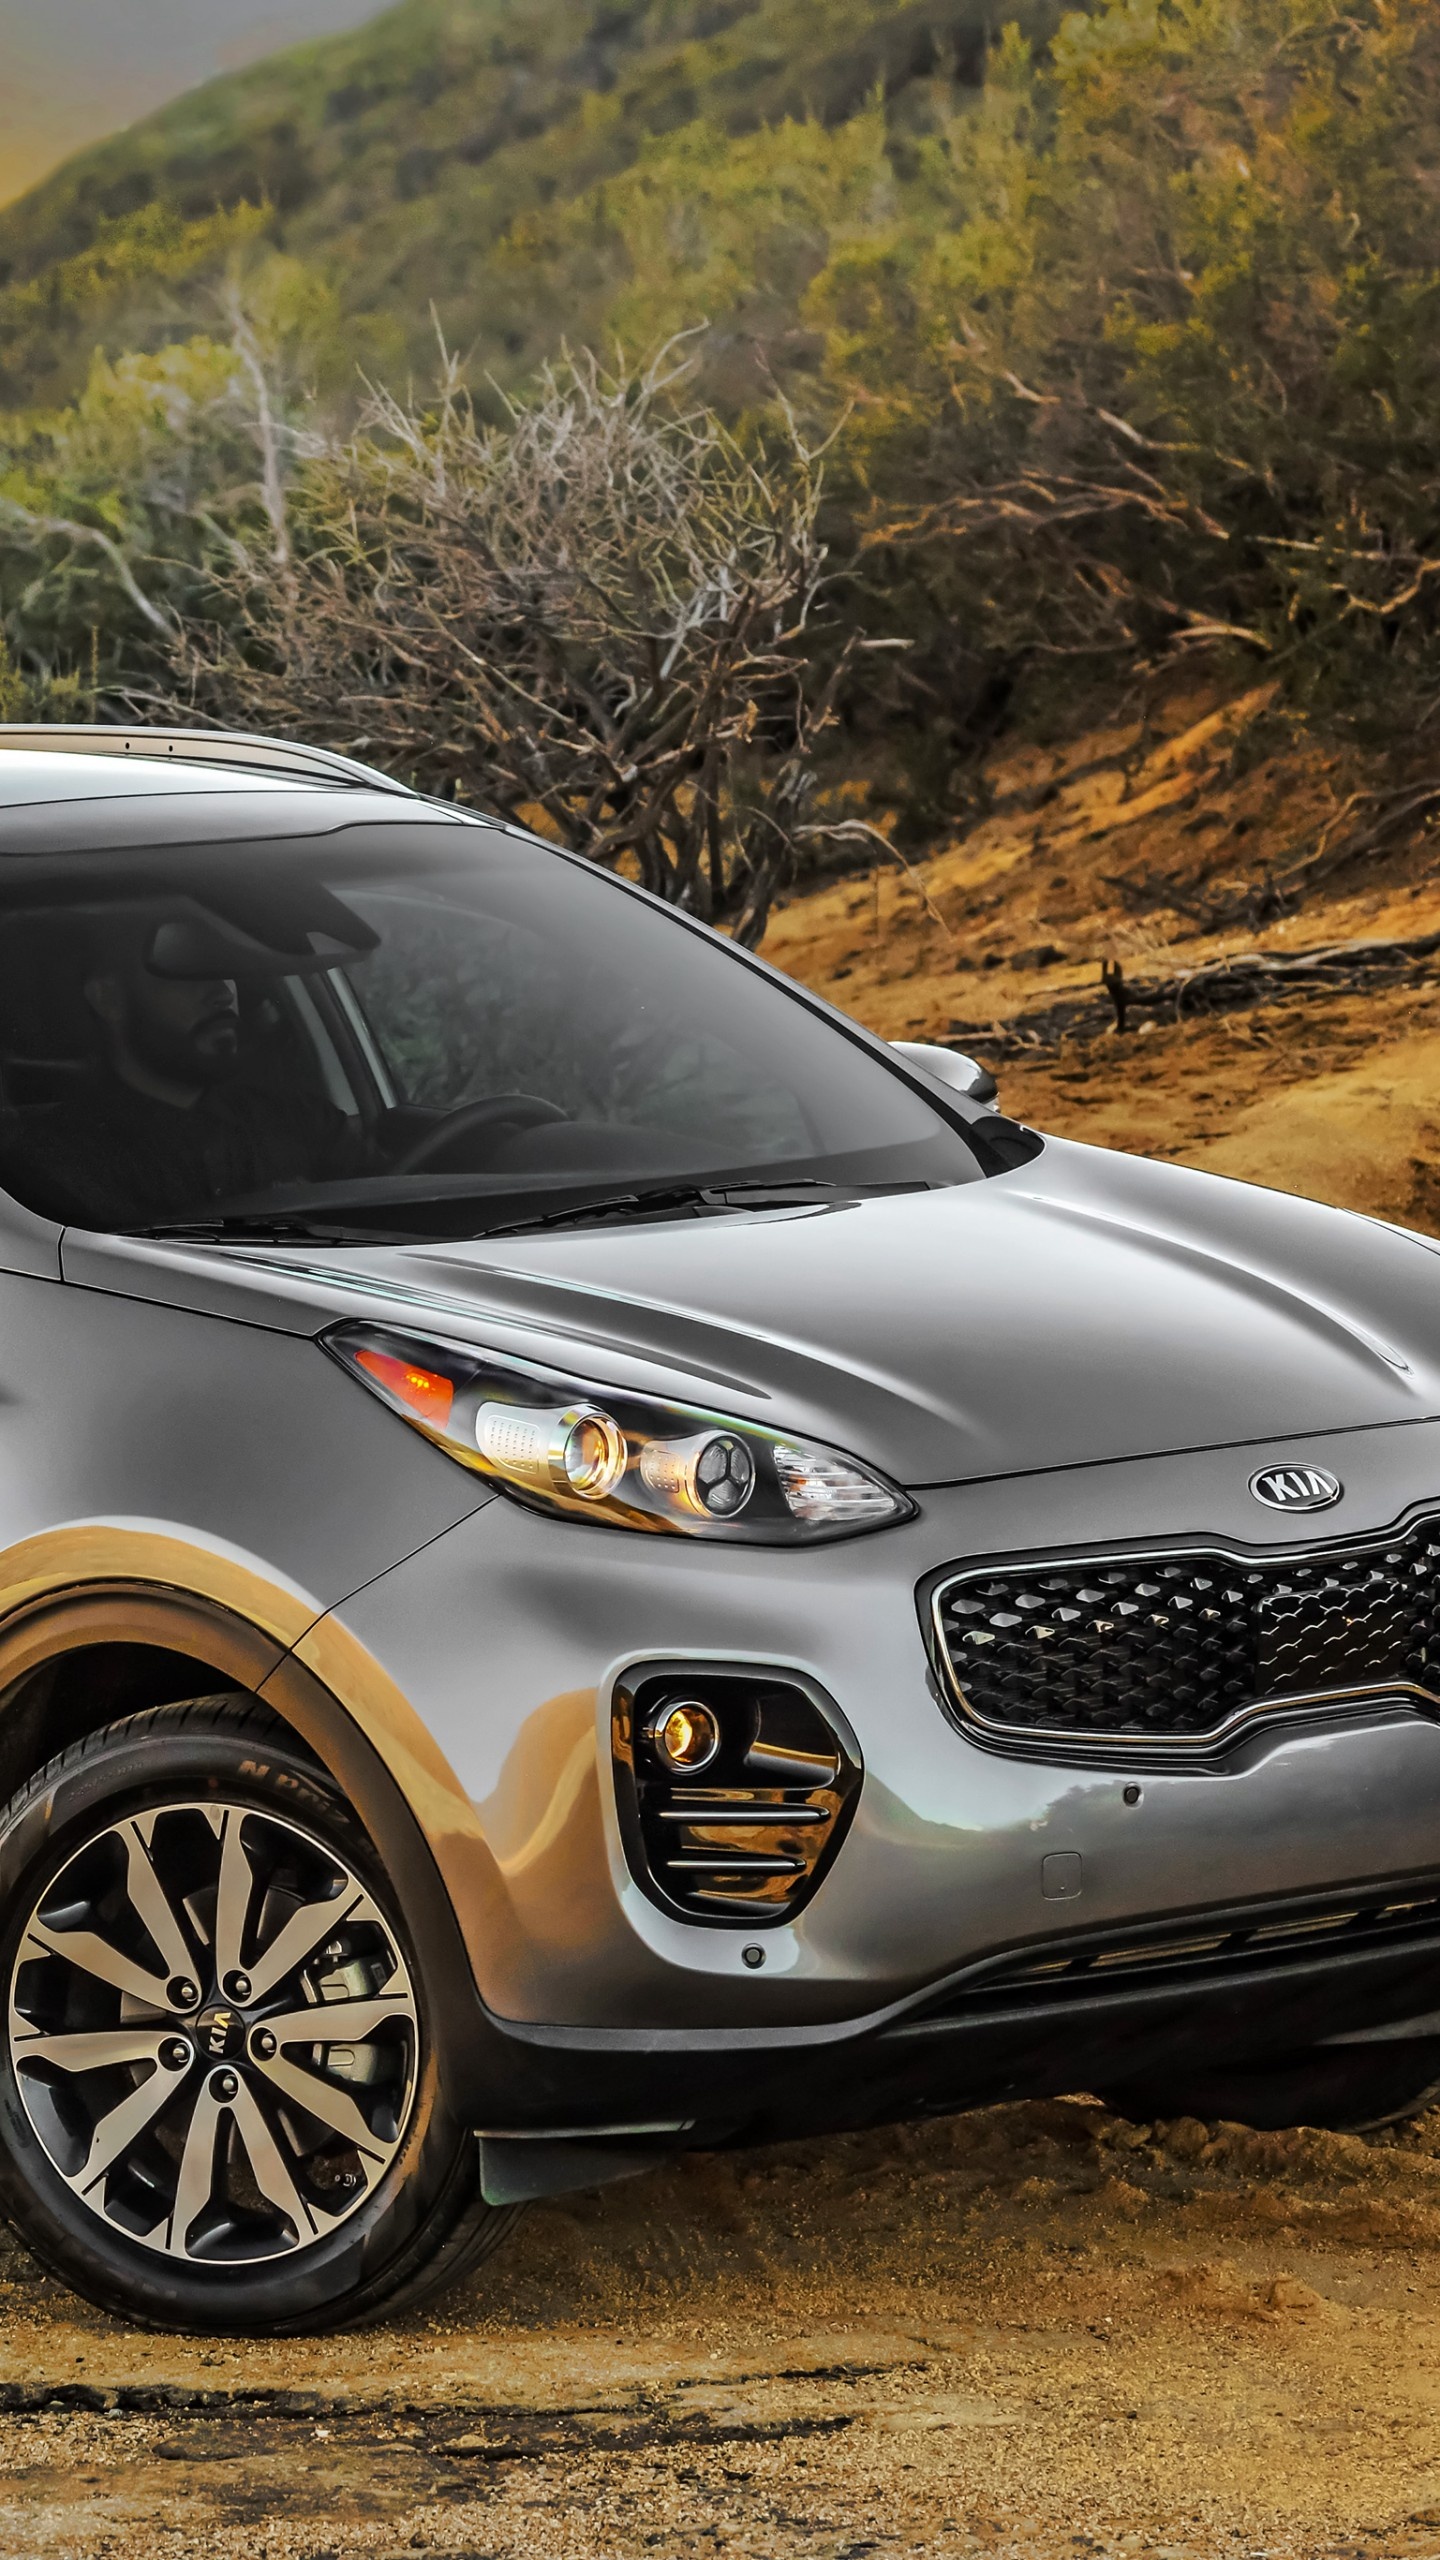 Kia Sportage, Ex crossover, Cars and bikes, Striking wallpapers, 1440x2560 HD Handy